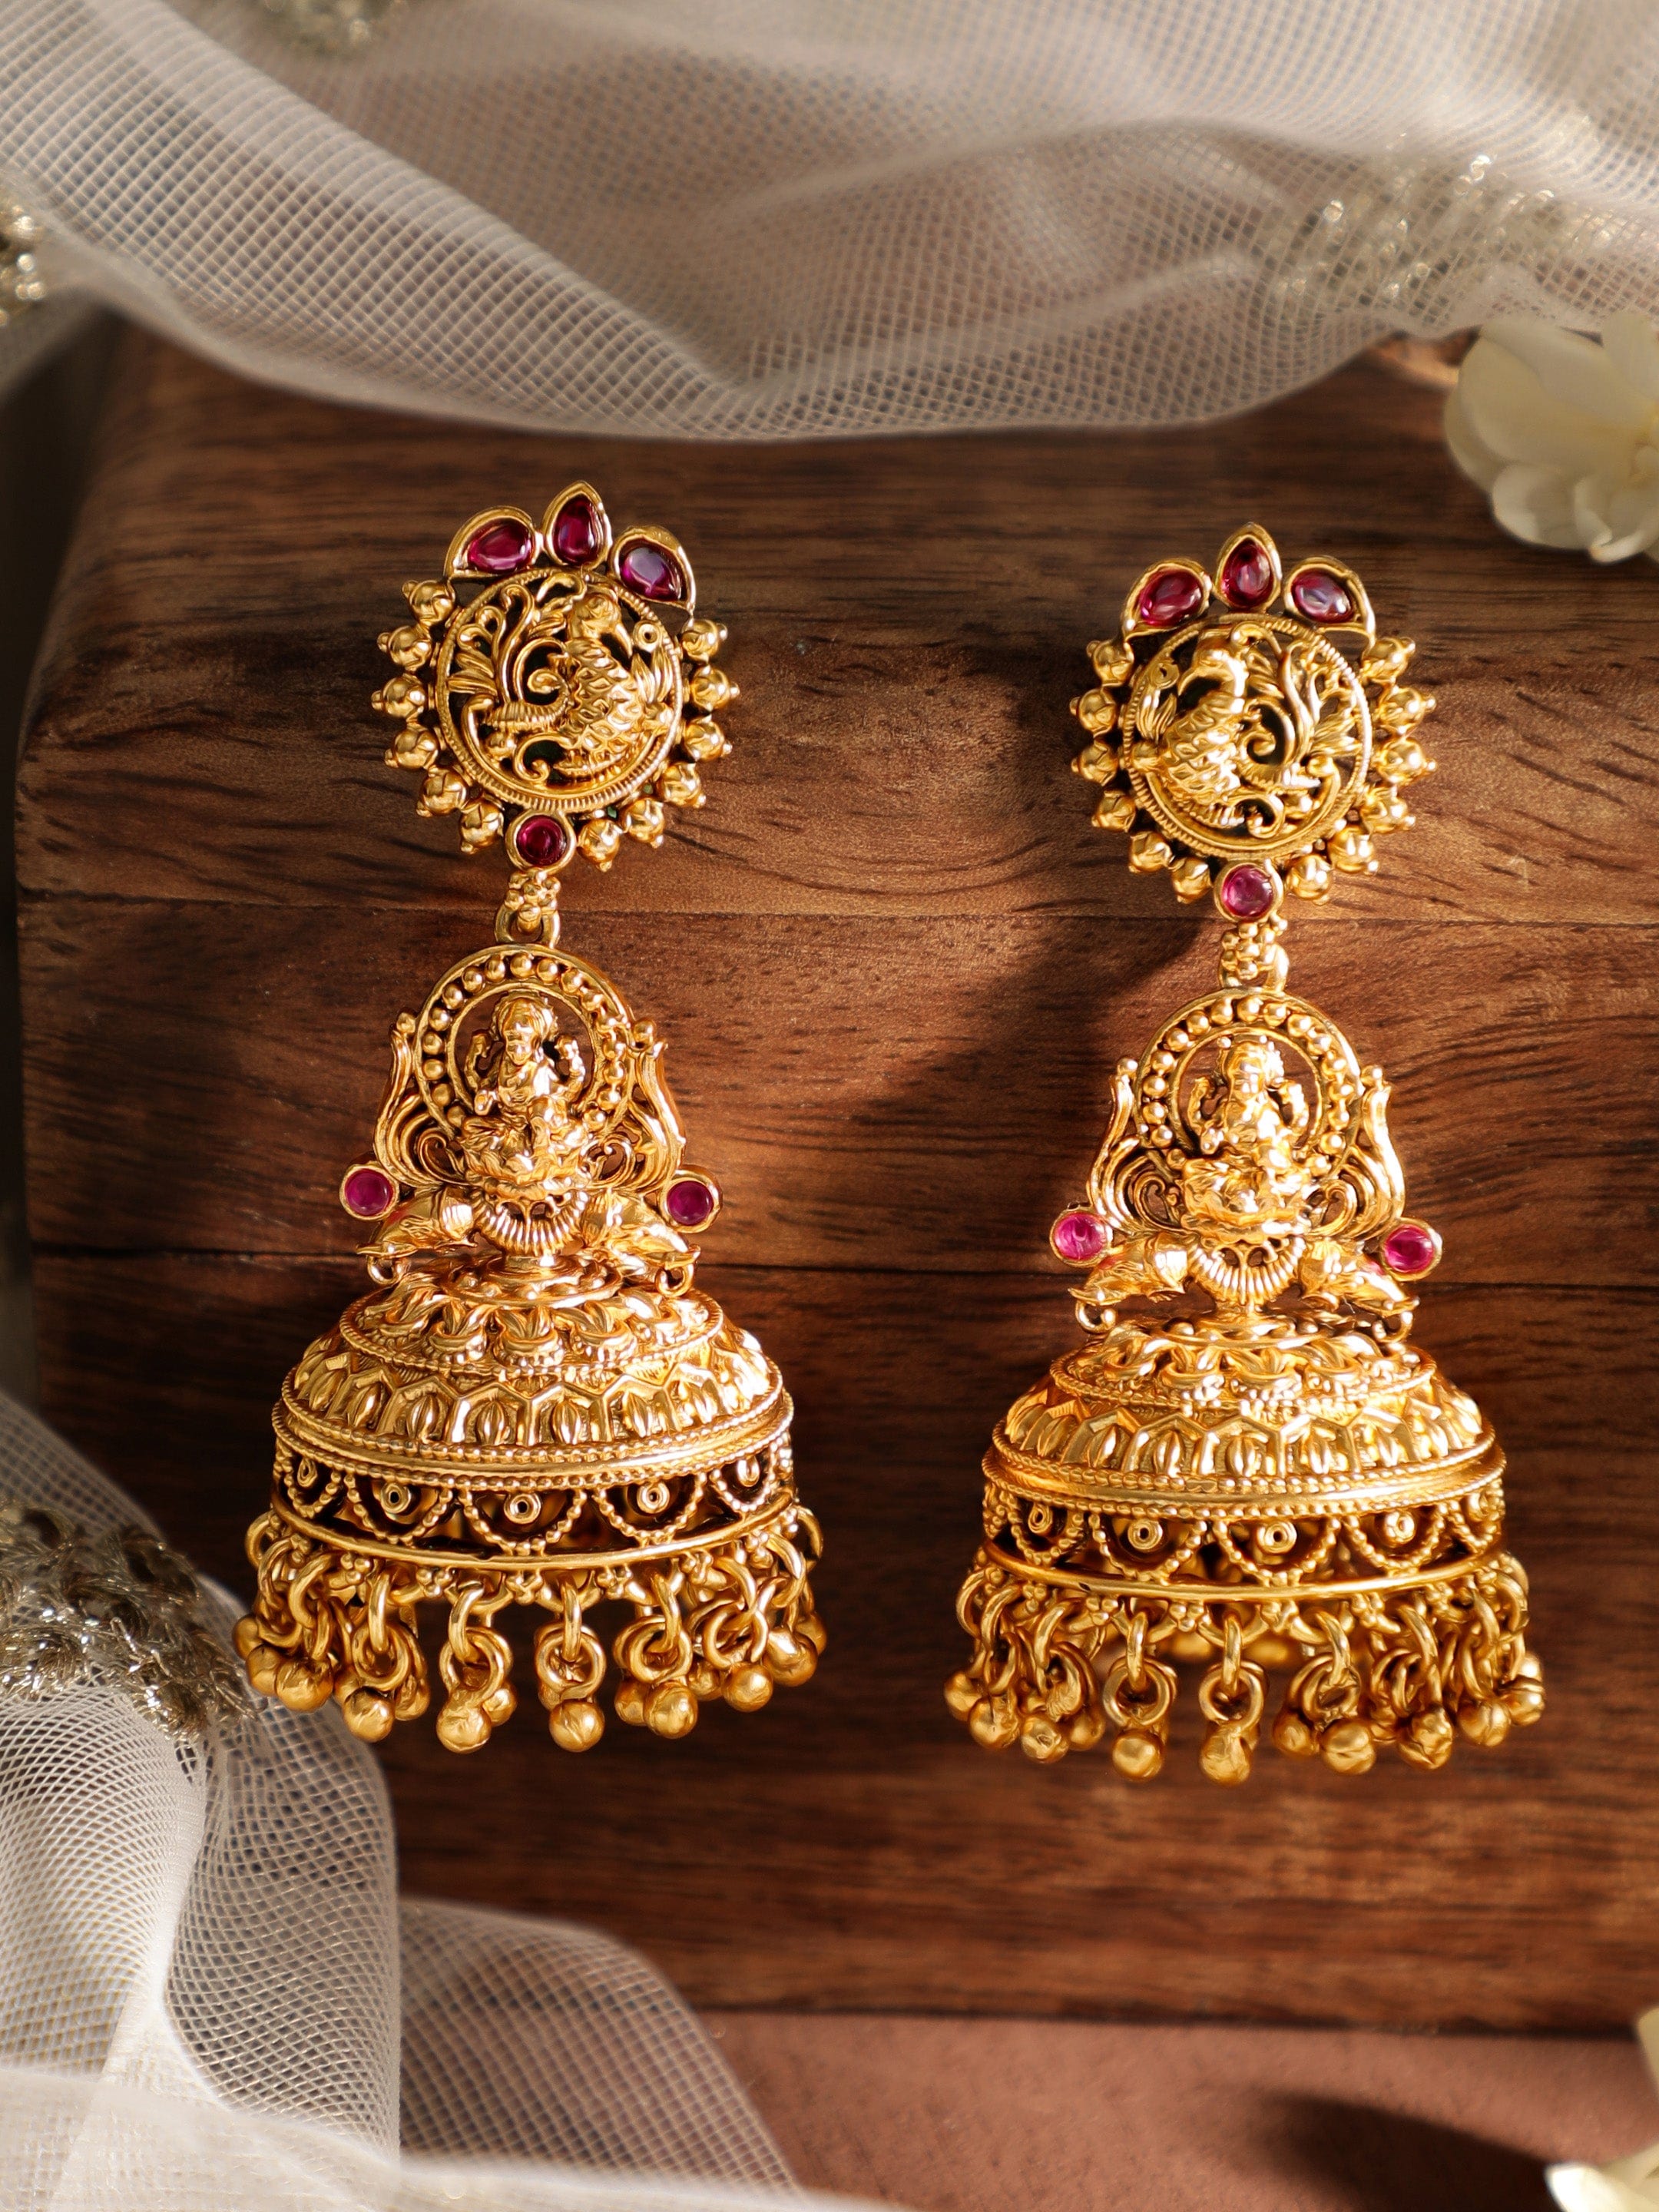 Bridal temple jewellery collection online | Kalyan Jewellers